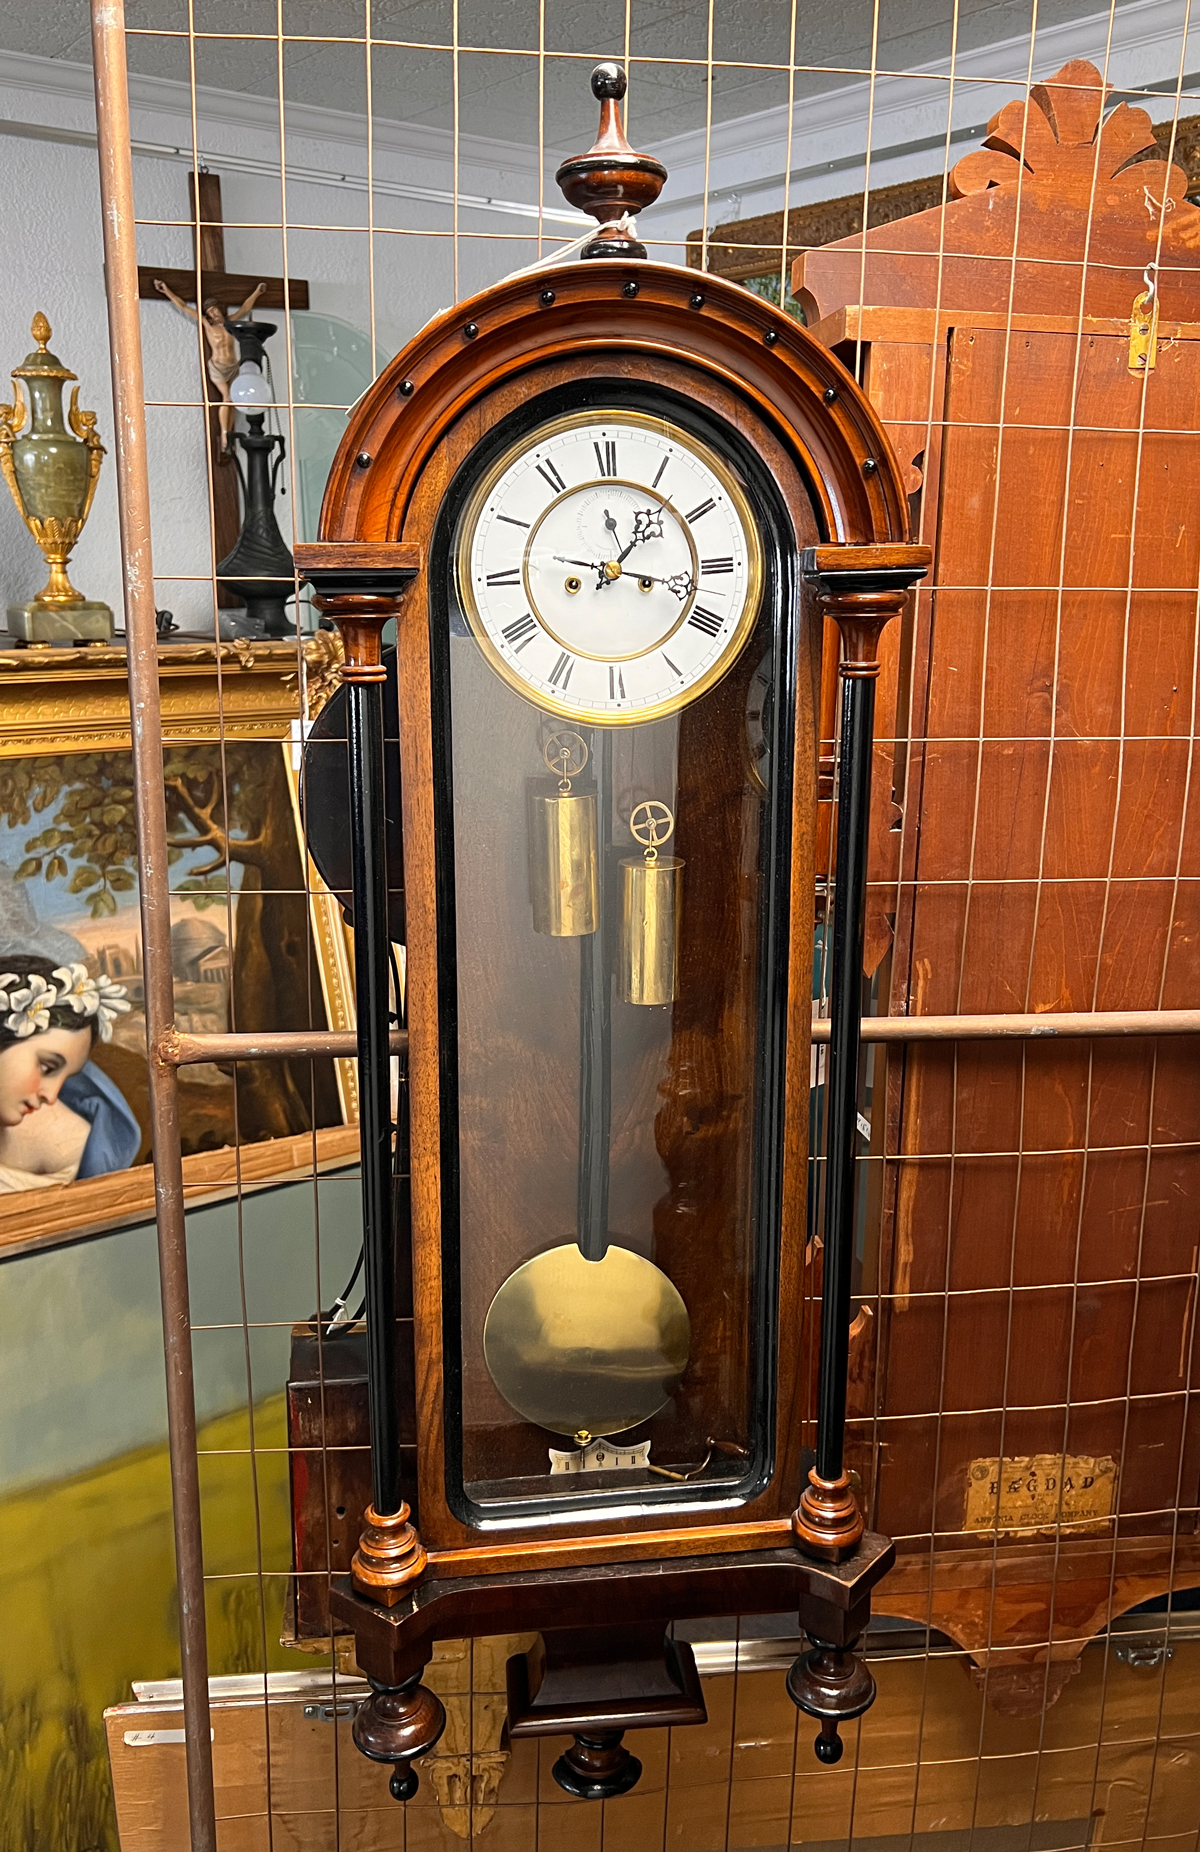 19TH-CENTURY CARVED WALL CLOCK: Antique